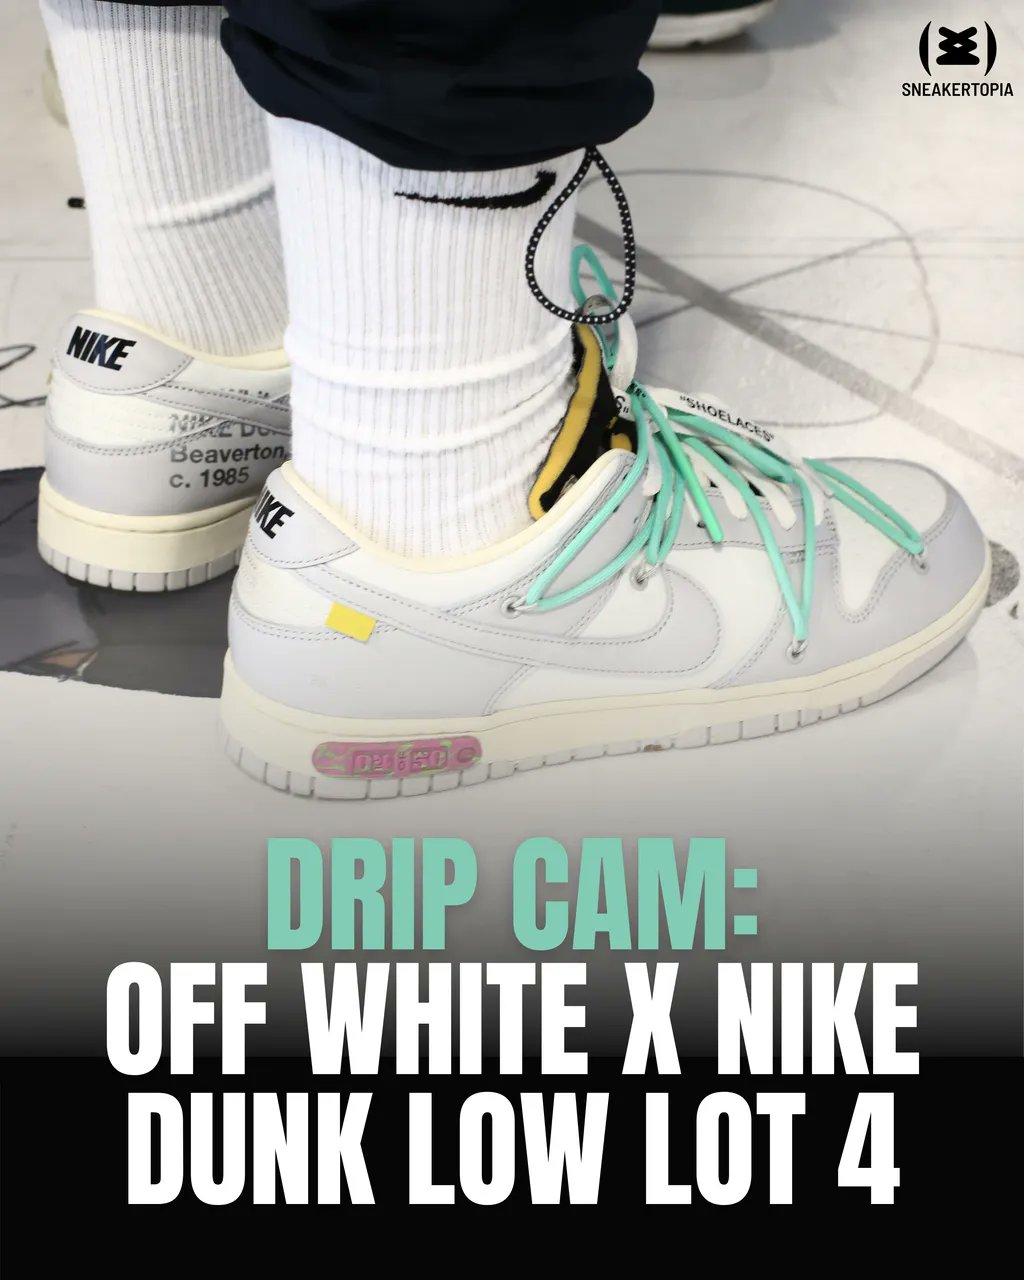 Sneakertopia on X: "Nike Dunk Low Off-White Lot 4 is part of the 48 Dunk  with gray hue - unlike the number 1 and 50 of the different iterations  (called "Lots") of